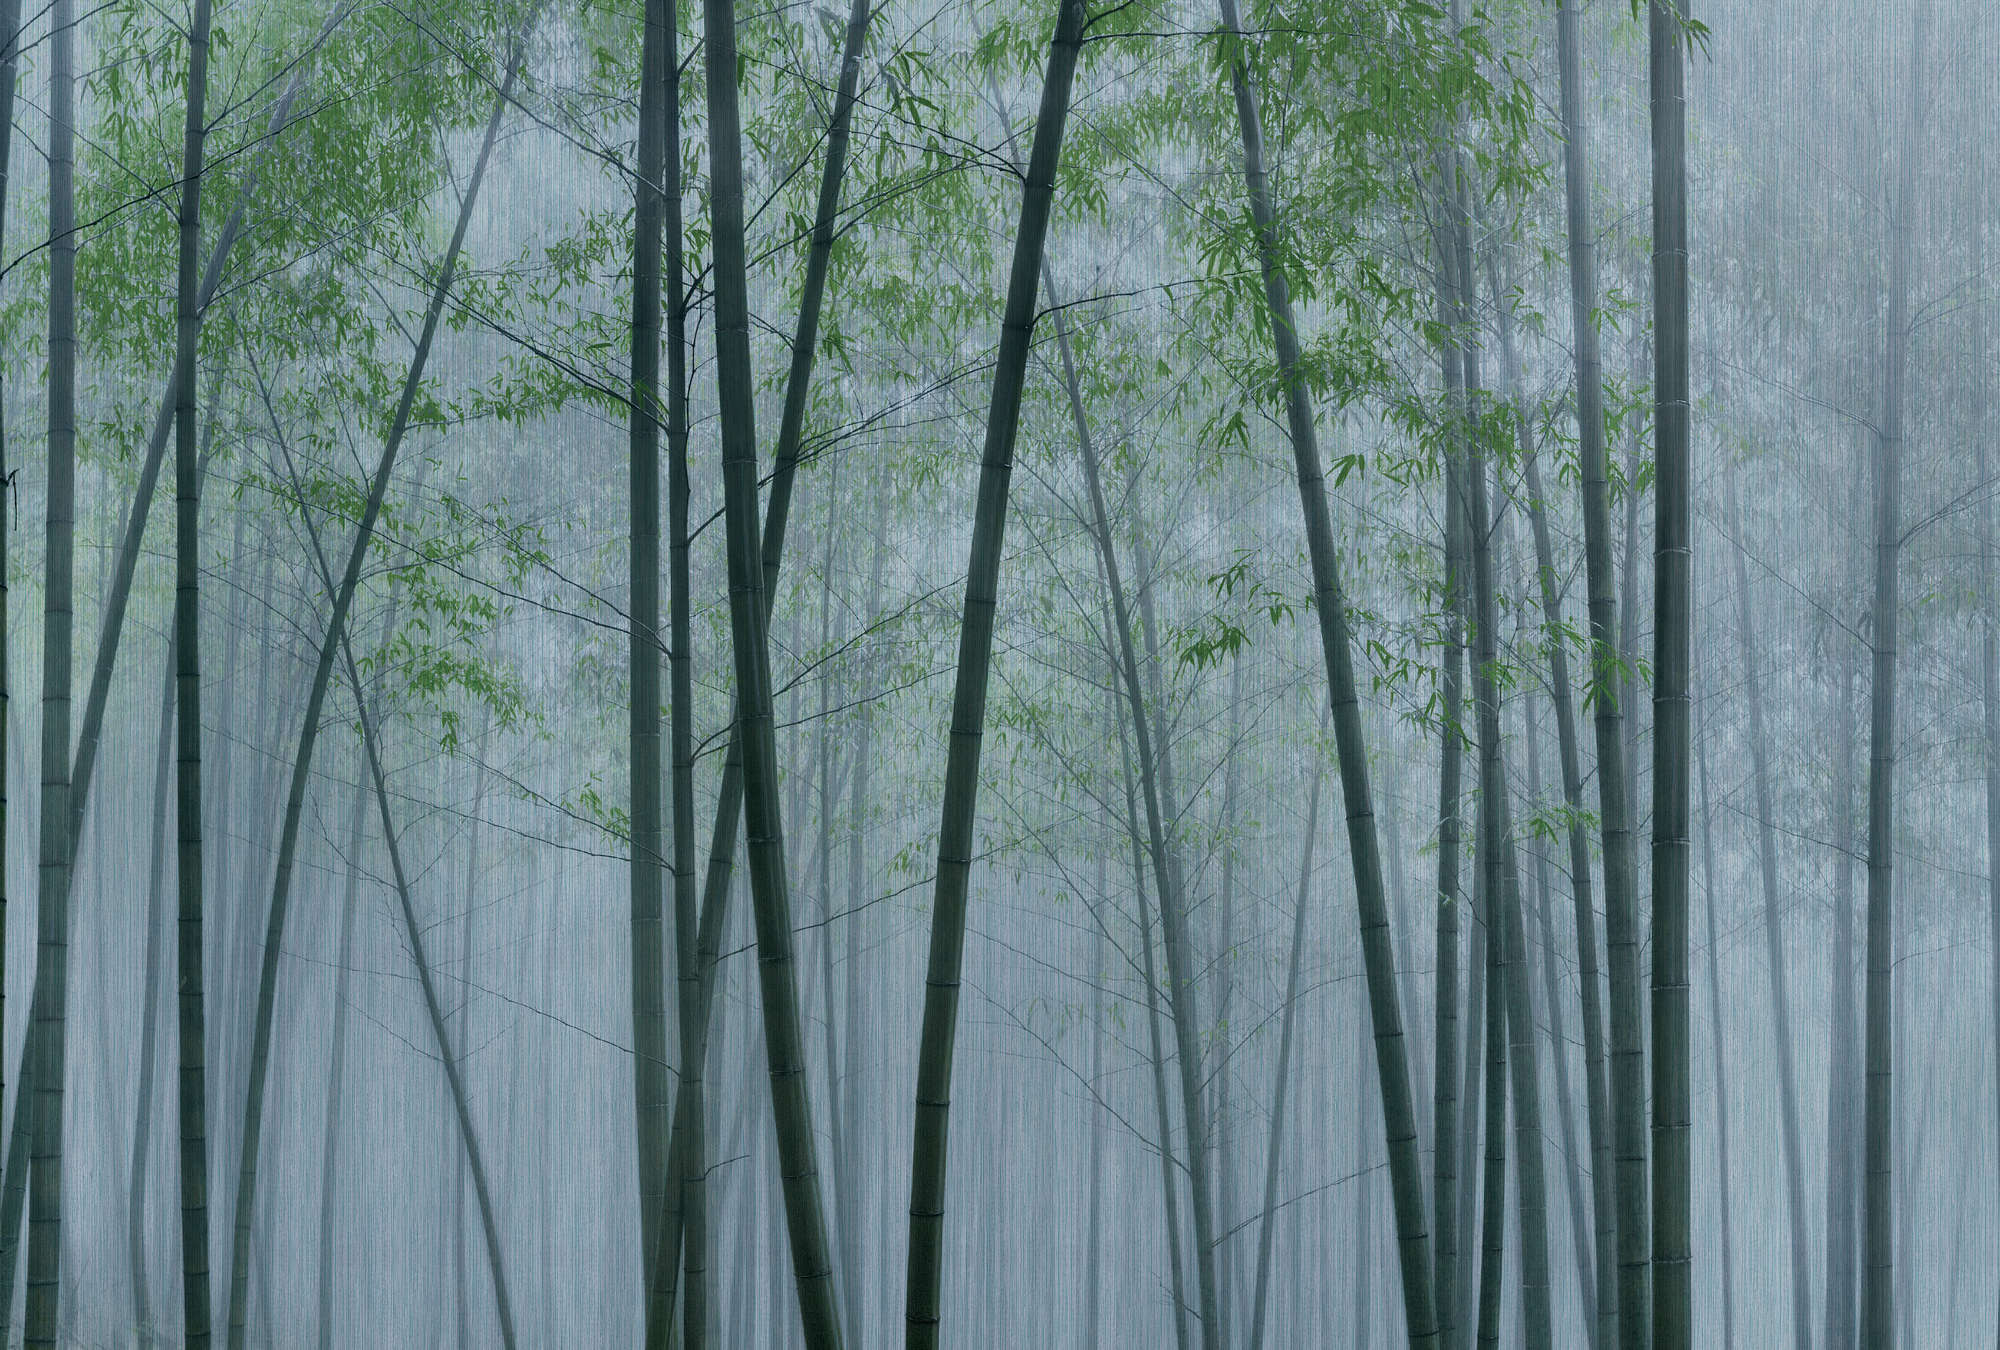             In the Bamboo 2 – Fototapete Bambus-Wald im Morgengrauen
        